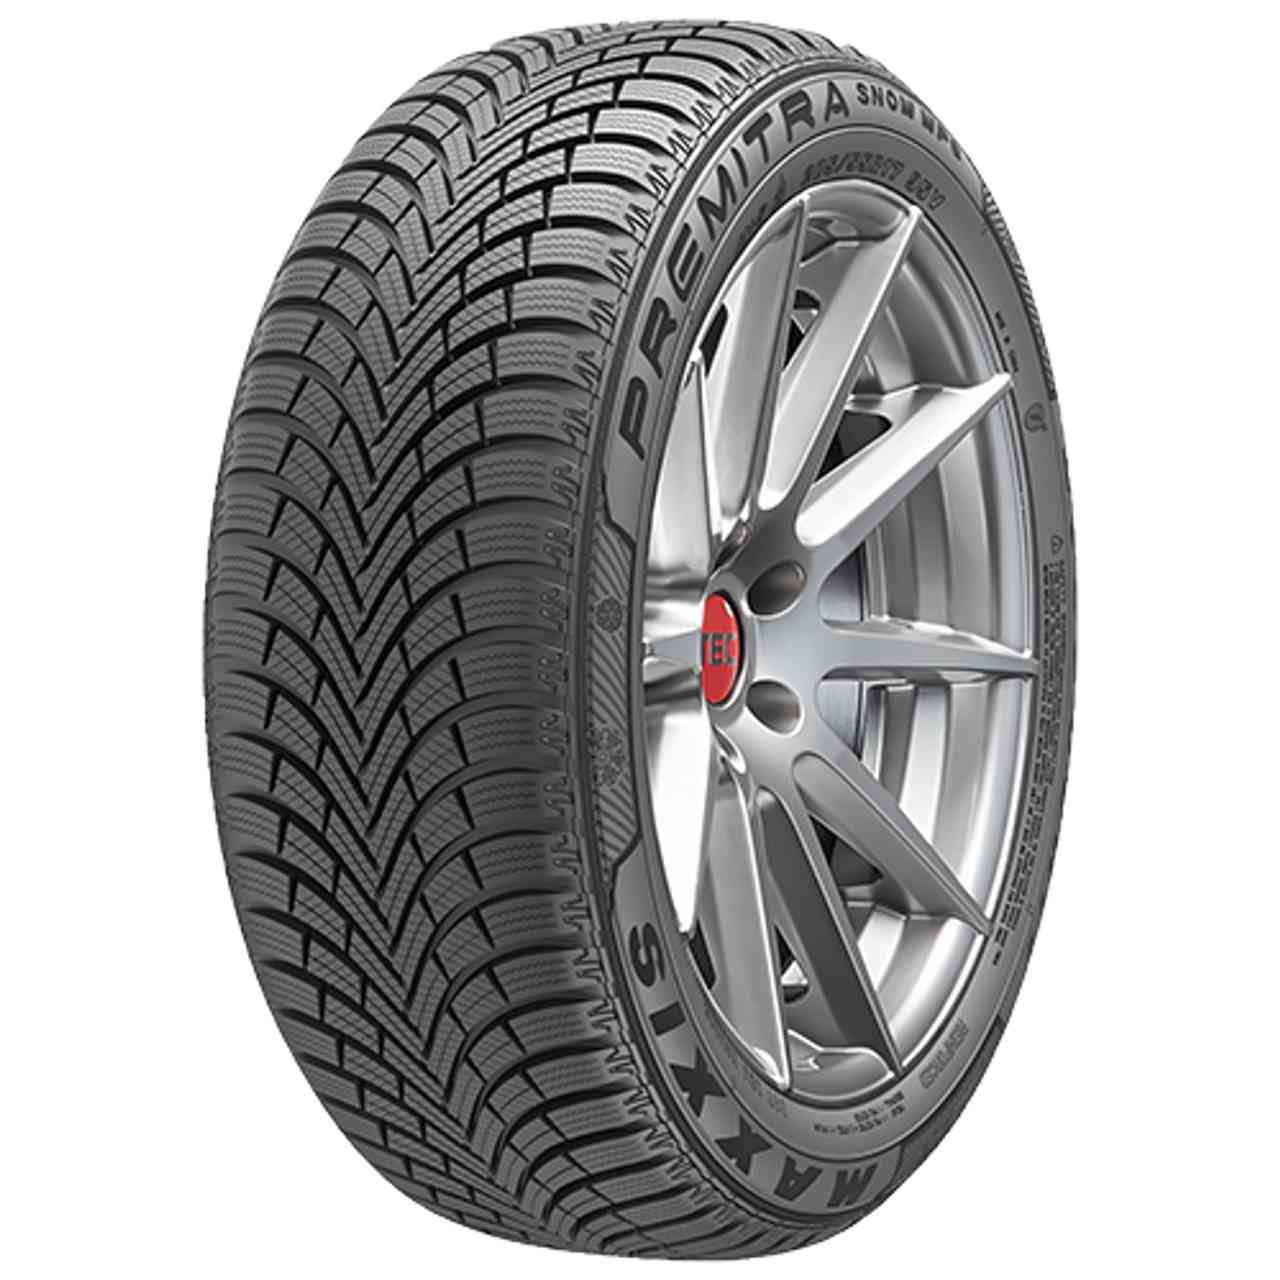 MAXXIS PREMITRA SNOW WP6 185/55R15 86H BSW von MAXXIS